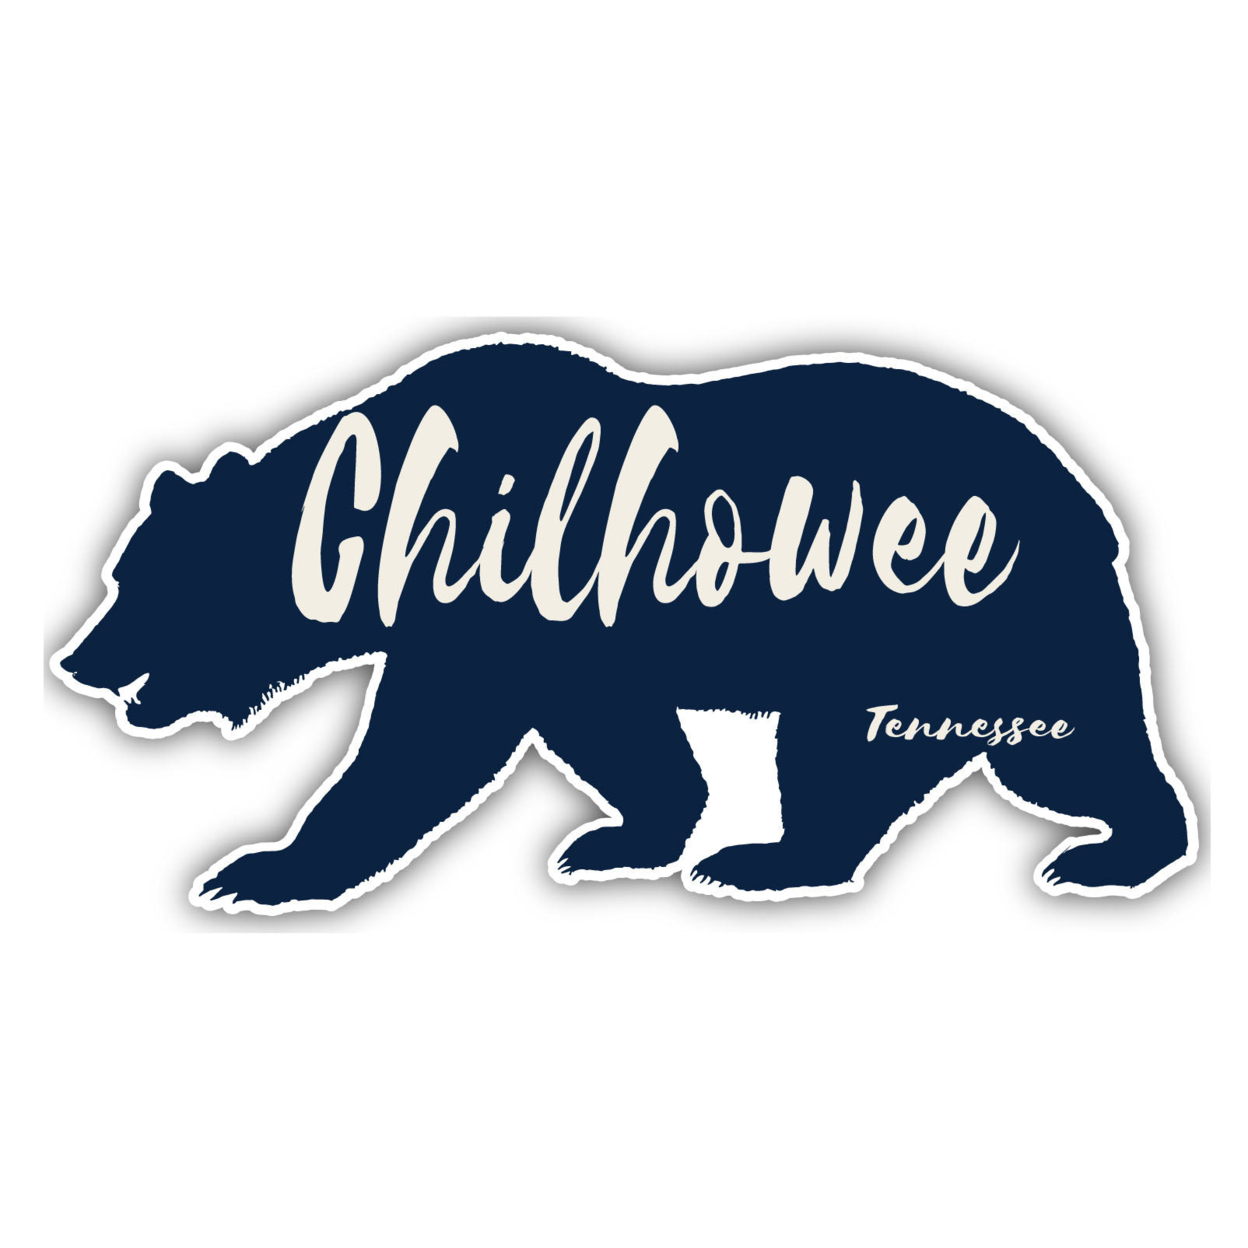 Chilhowee Tennessee Souvenir Decorative Stickers (Choose Theme And Size) - 4-Pack, 4-Inch, Bear